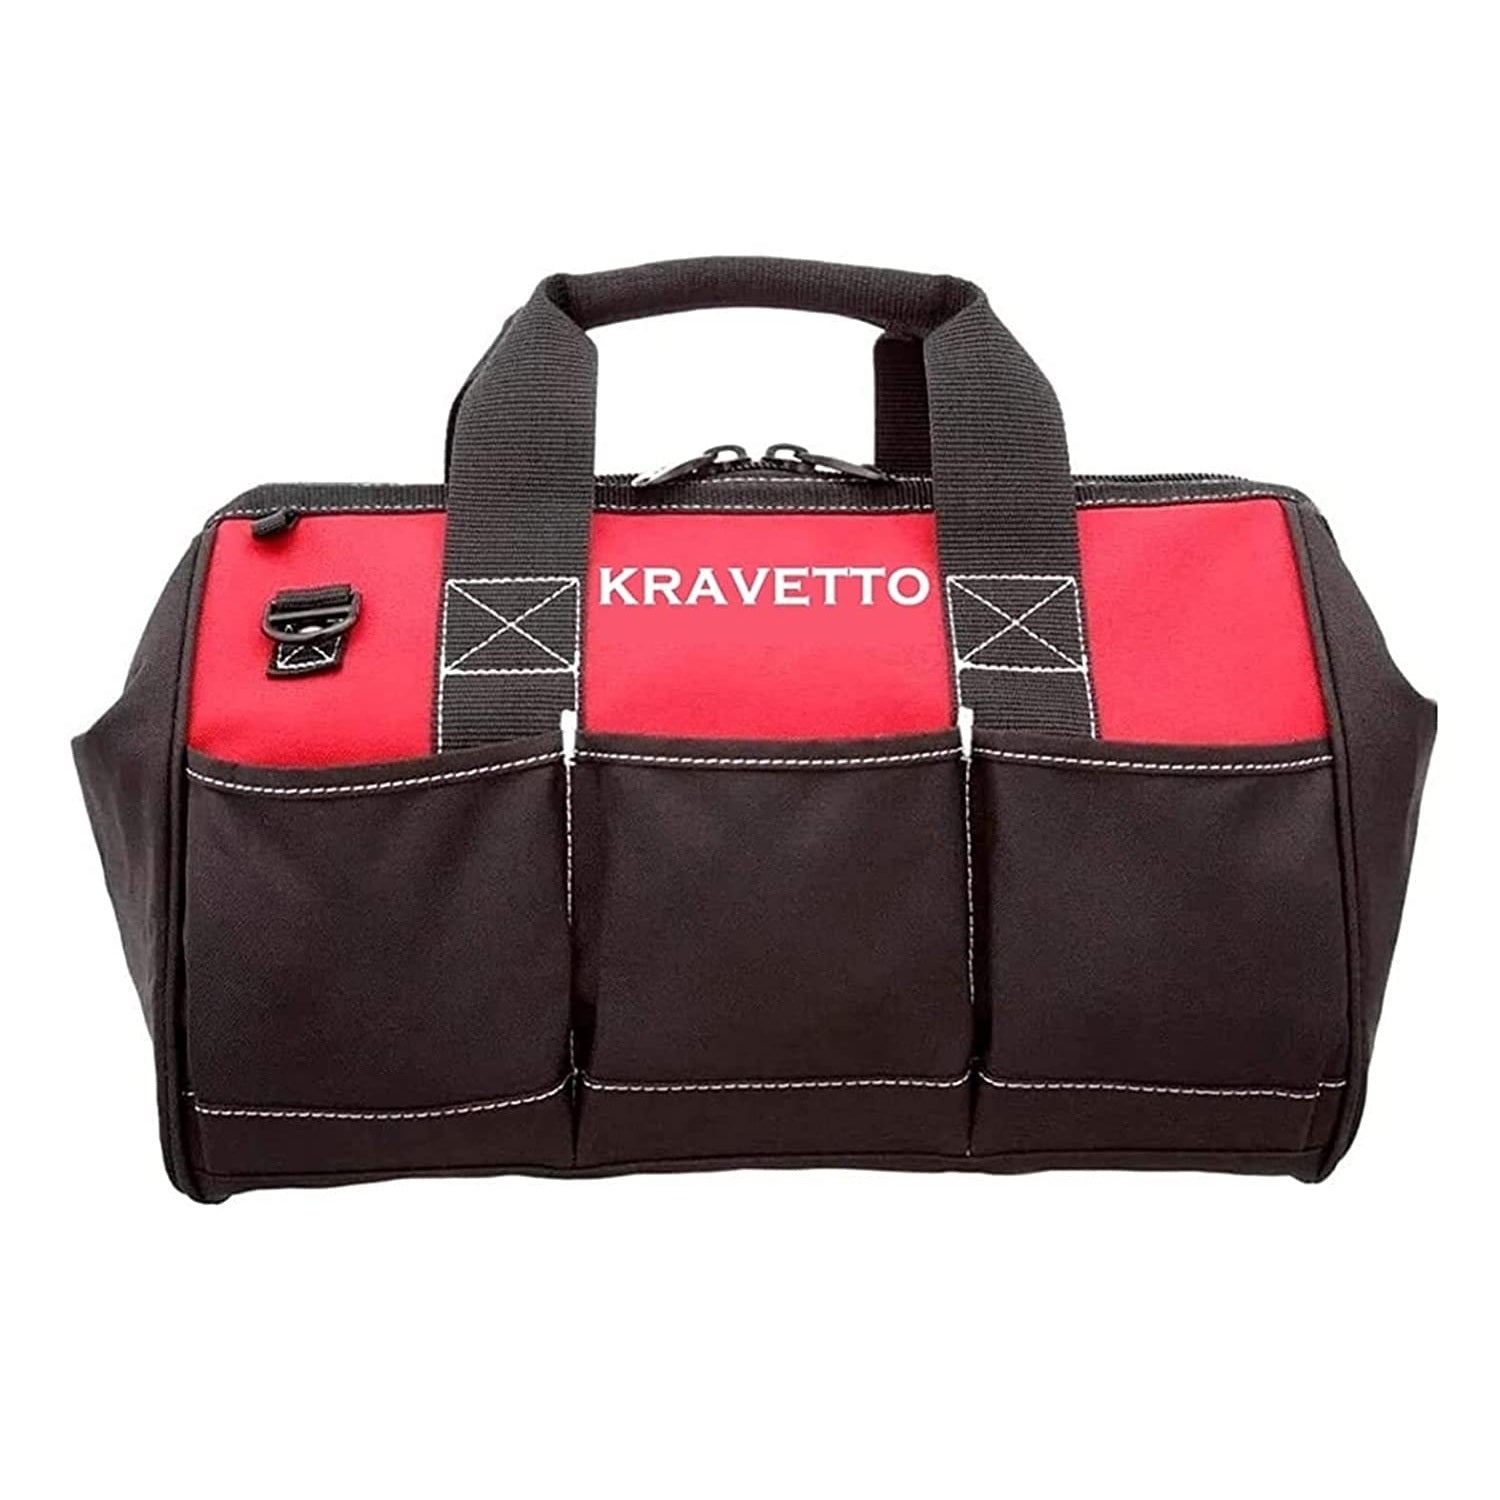 Kravetto Professional Tool Bag 16 inch